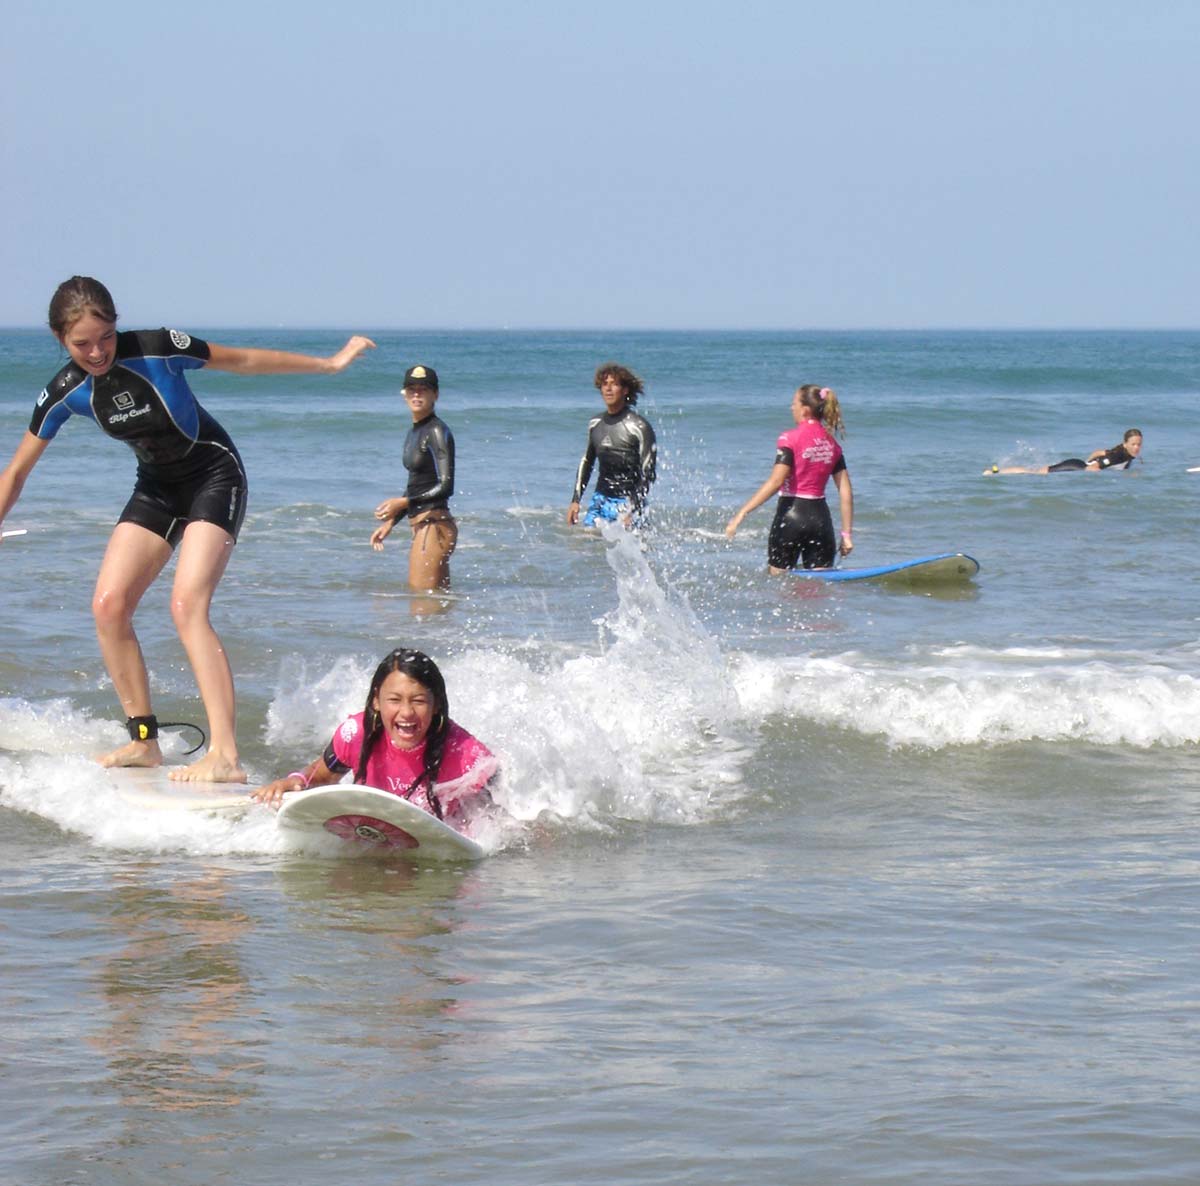 Group of surfers on a beach in Saint-Pierre d'Oléron